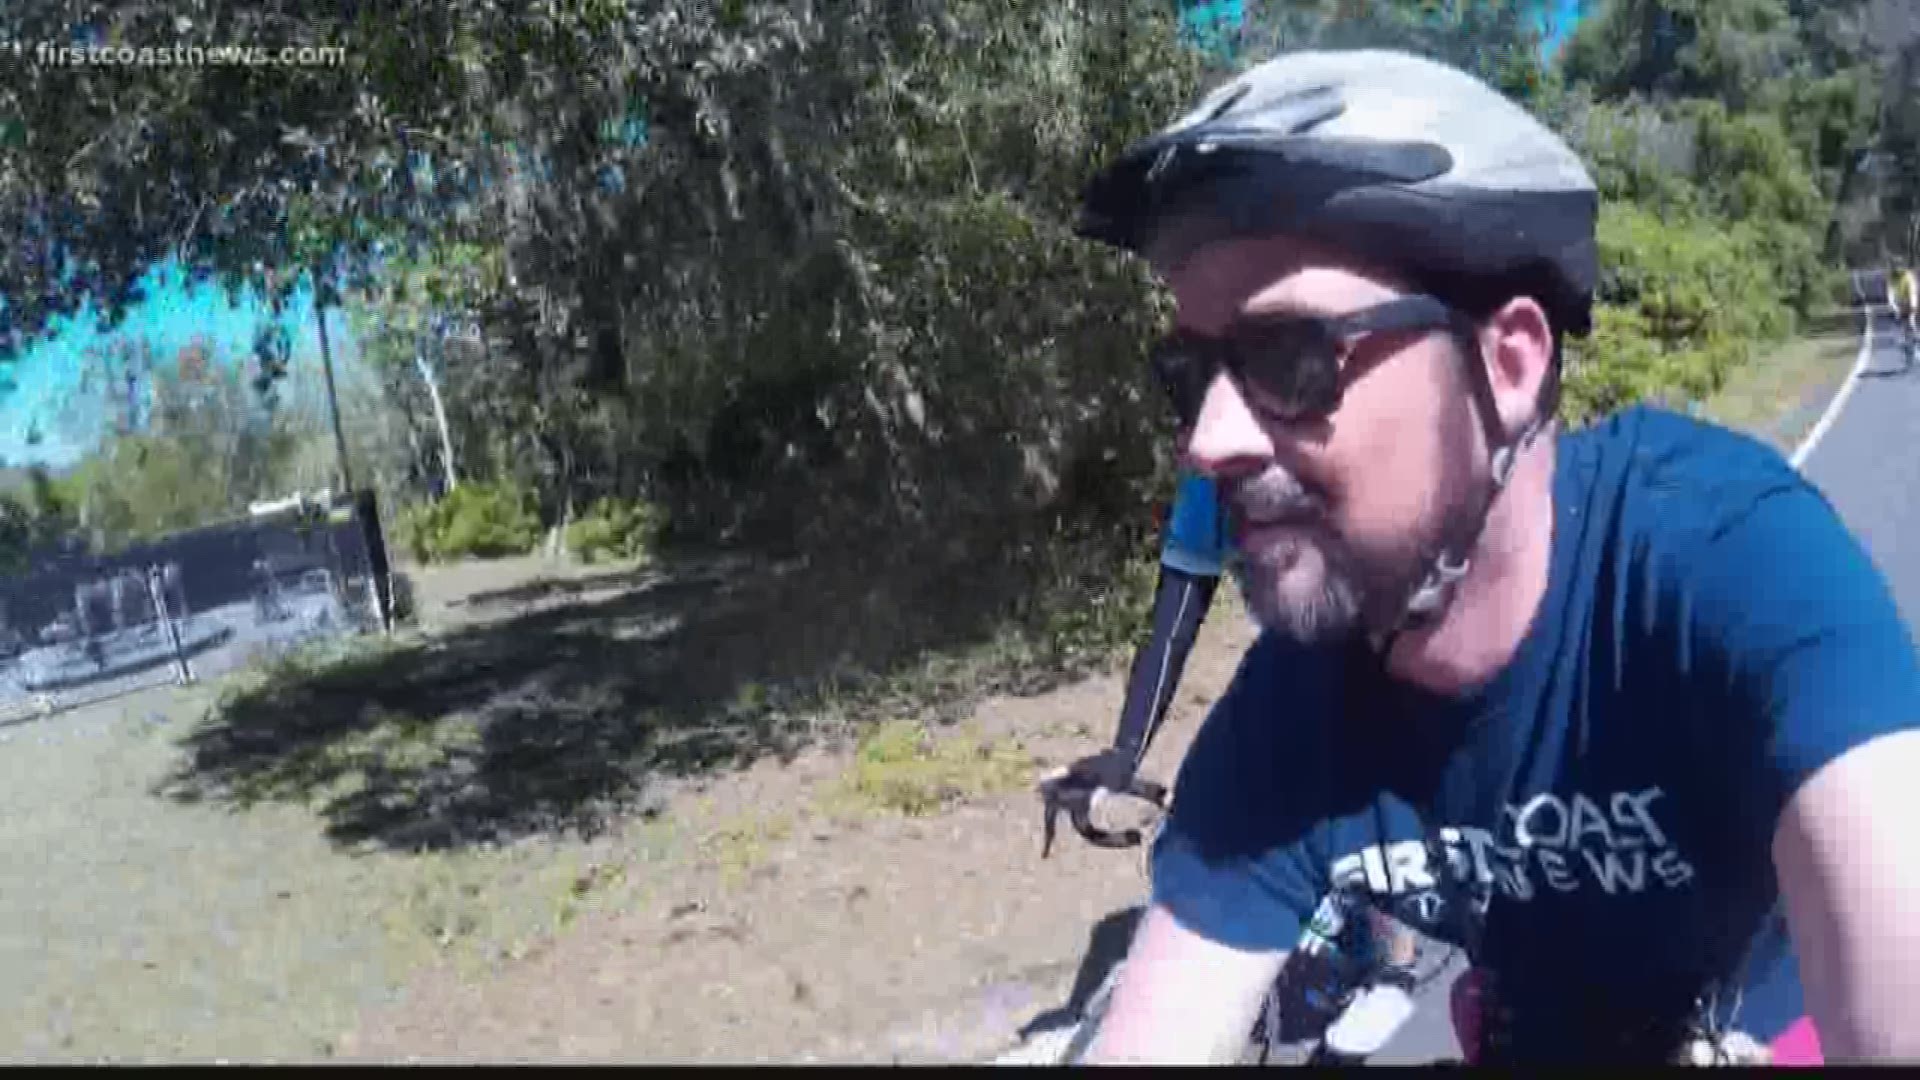 For 14 years, there has been a bike ride in Amelia Island in the honor of Katie Caple, who died in a car accident. Lew Turner took a tour of the course this year.